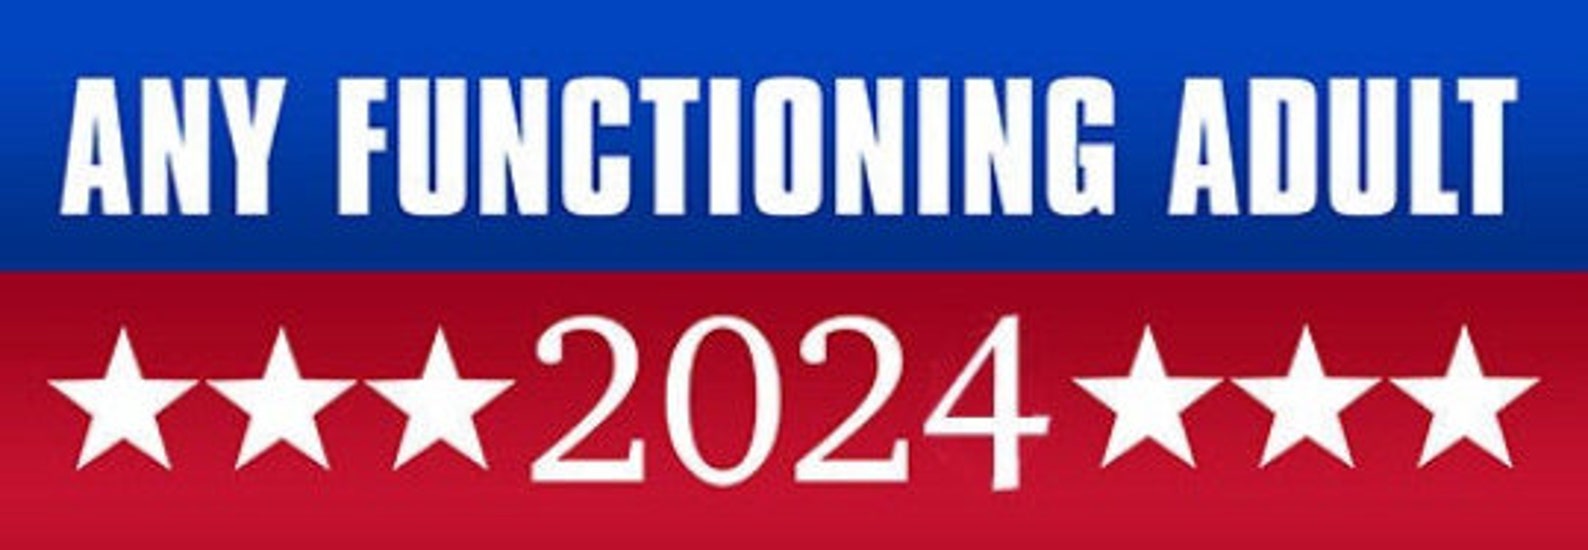 3x9 Inch Any Functioning Adult 2024 Bumper Sticker gop Funny Etsy